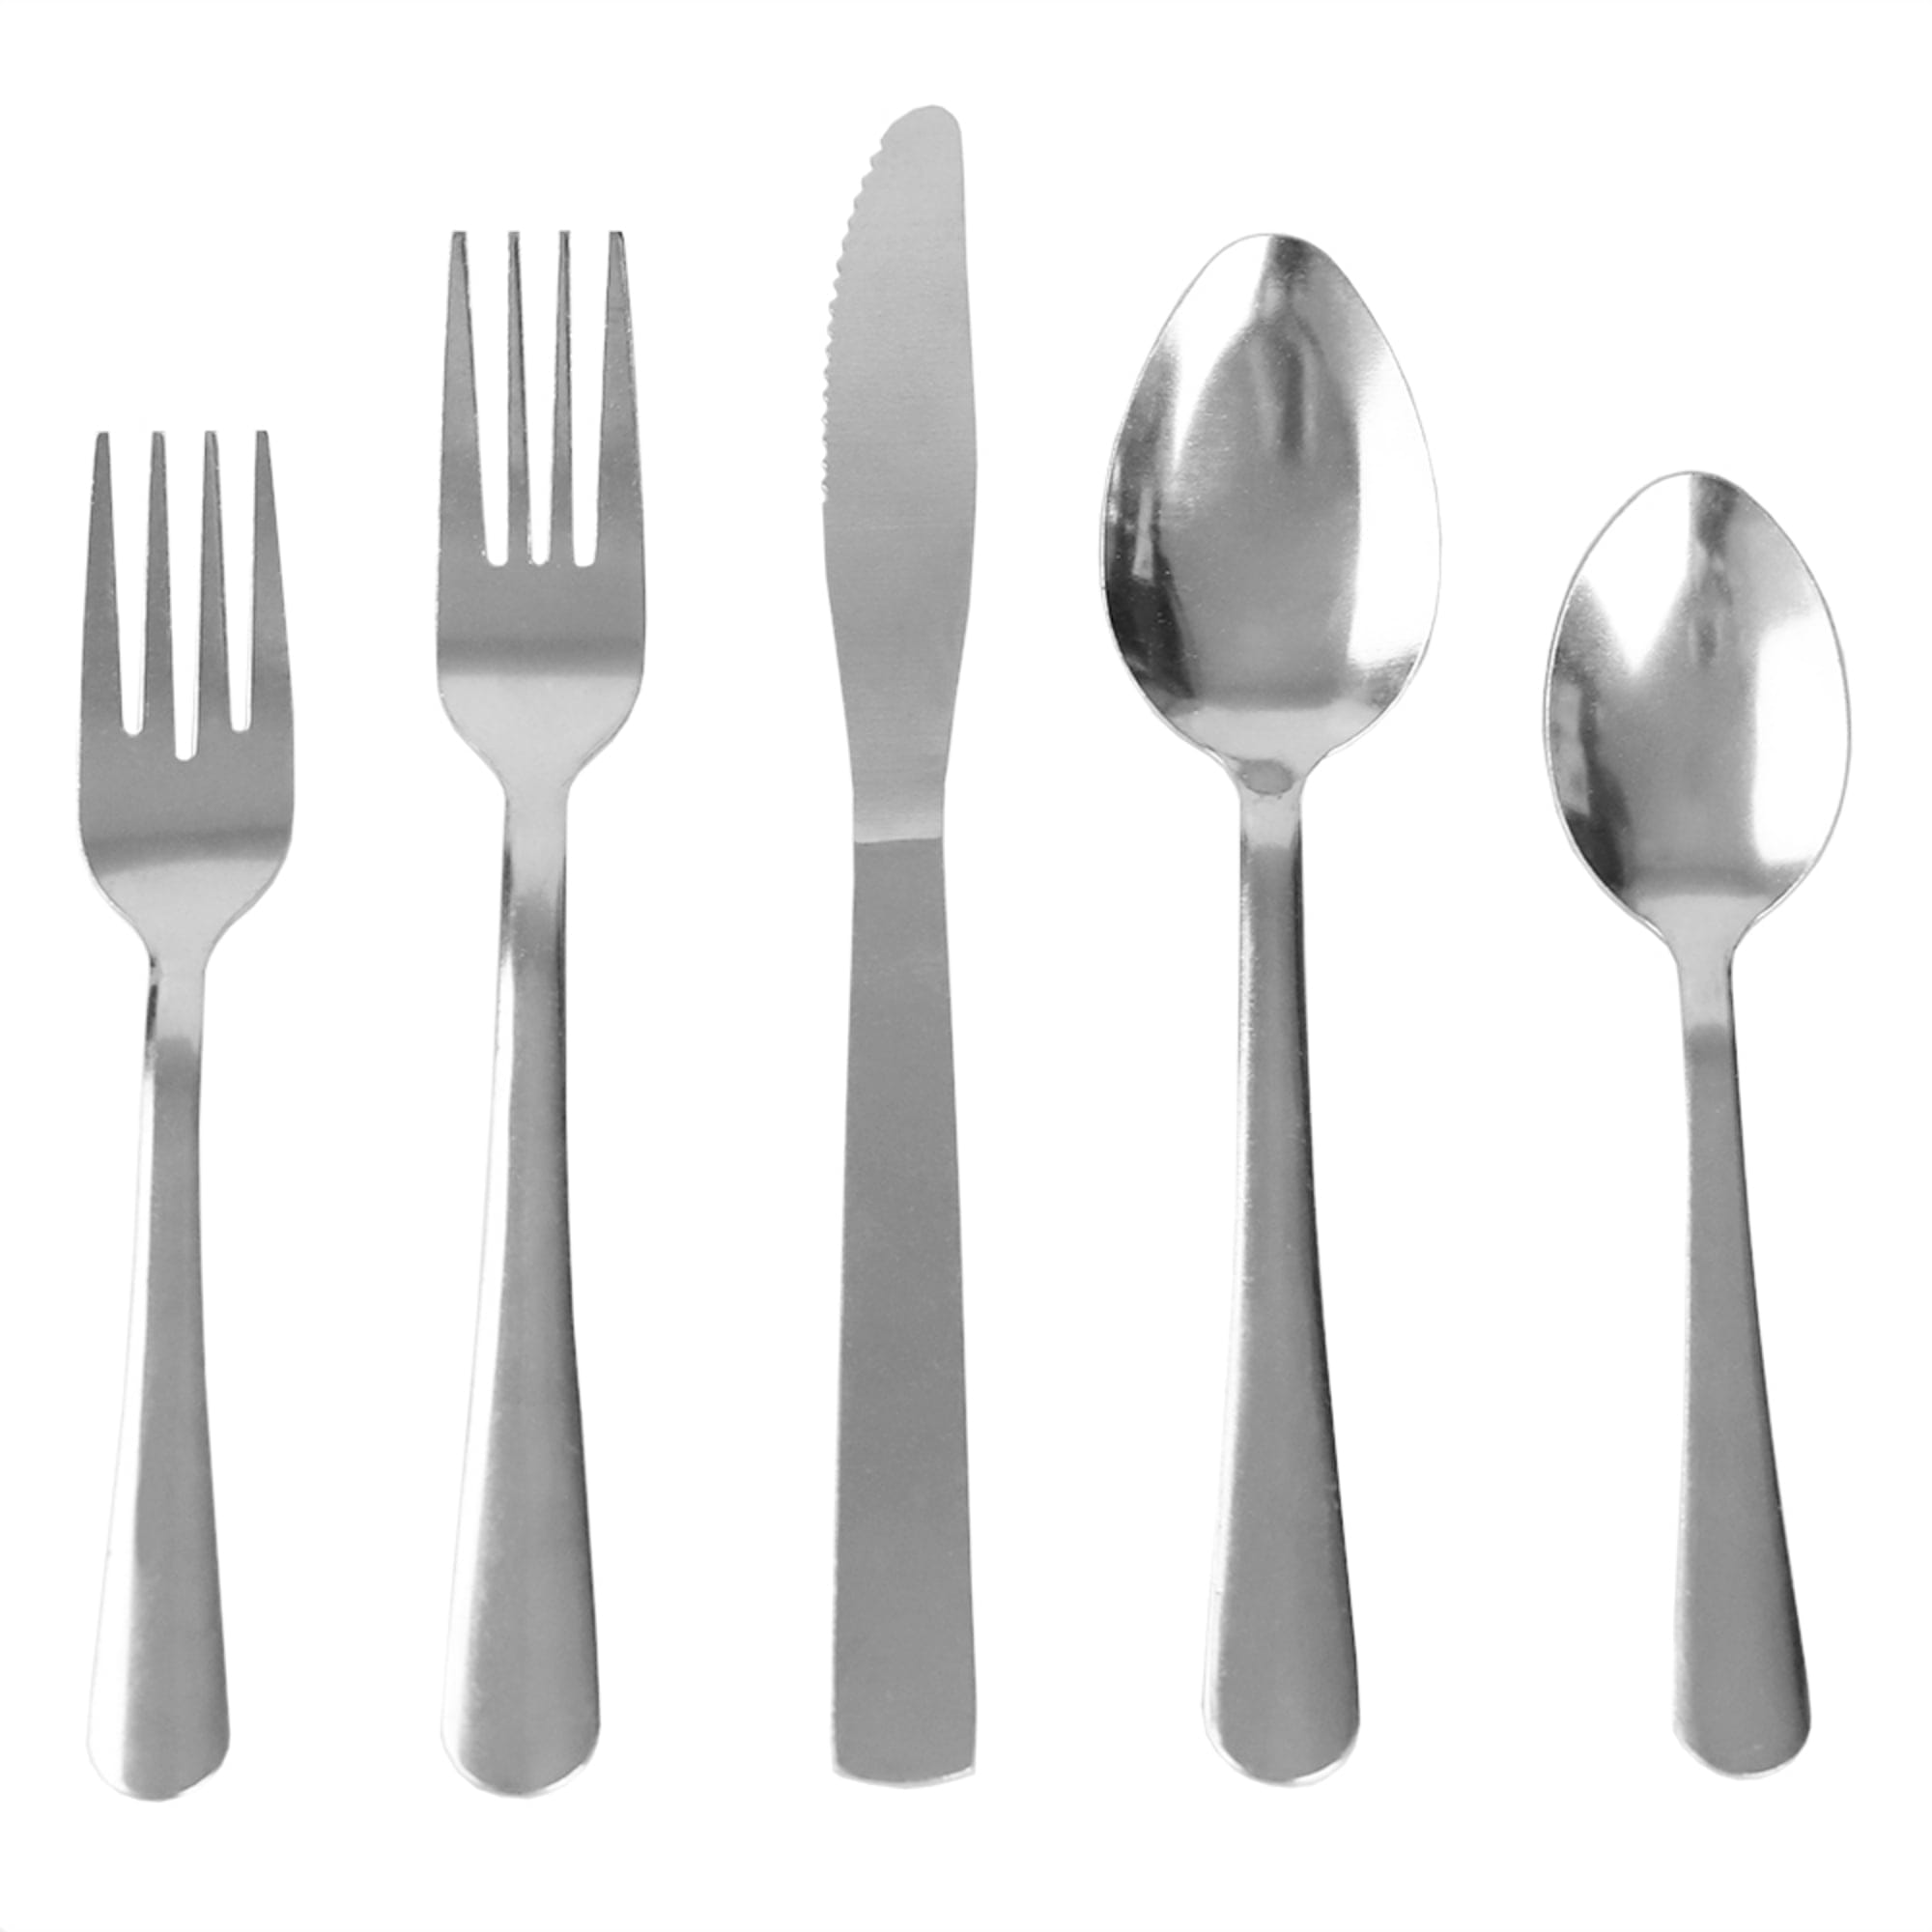 Home Basics Elle 20 Piece Stainless Steel Flatware Set, Silver $8.00 EACH, CASE PACK OF 12